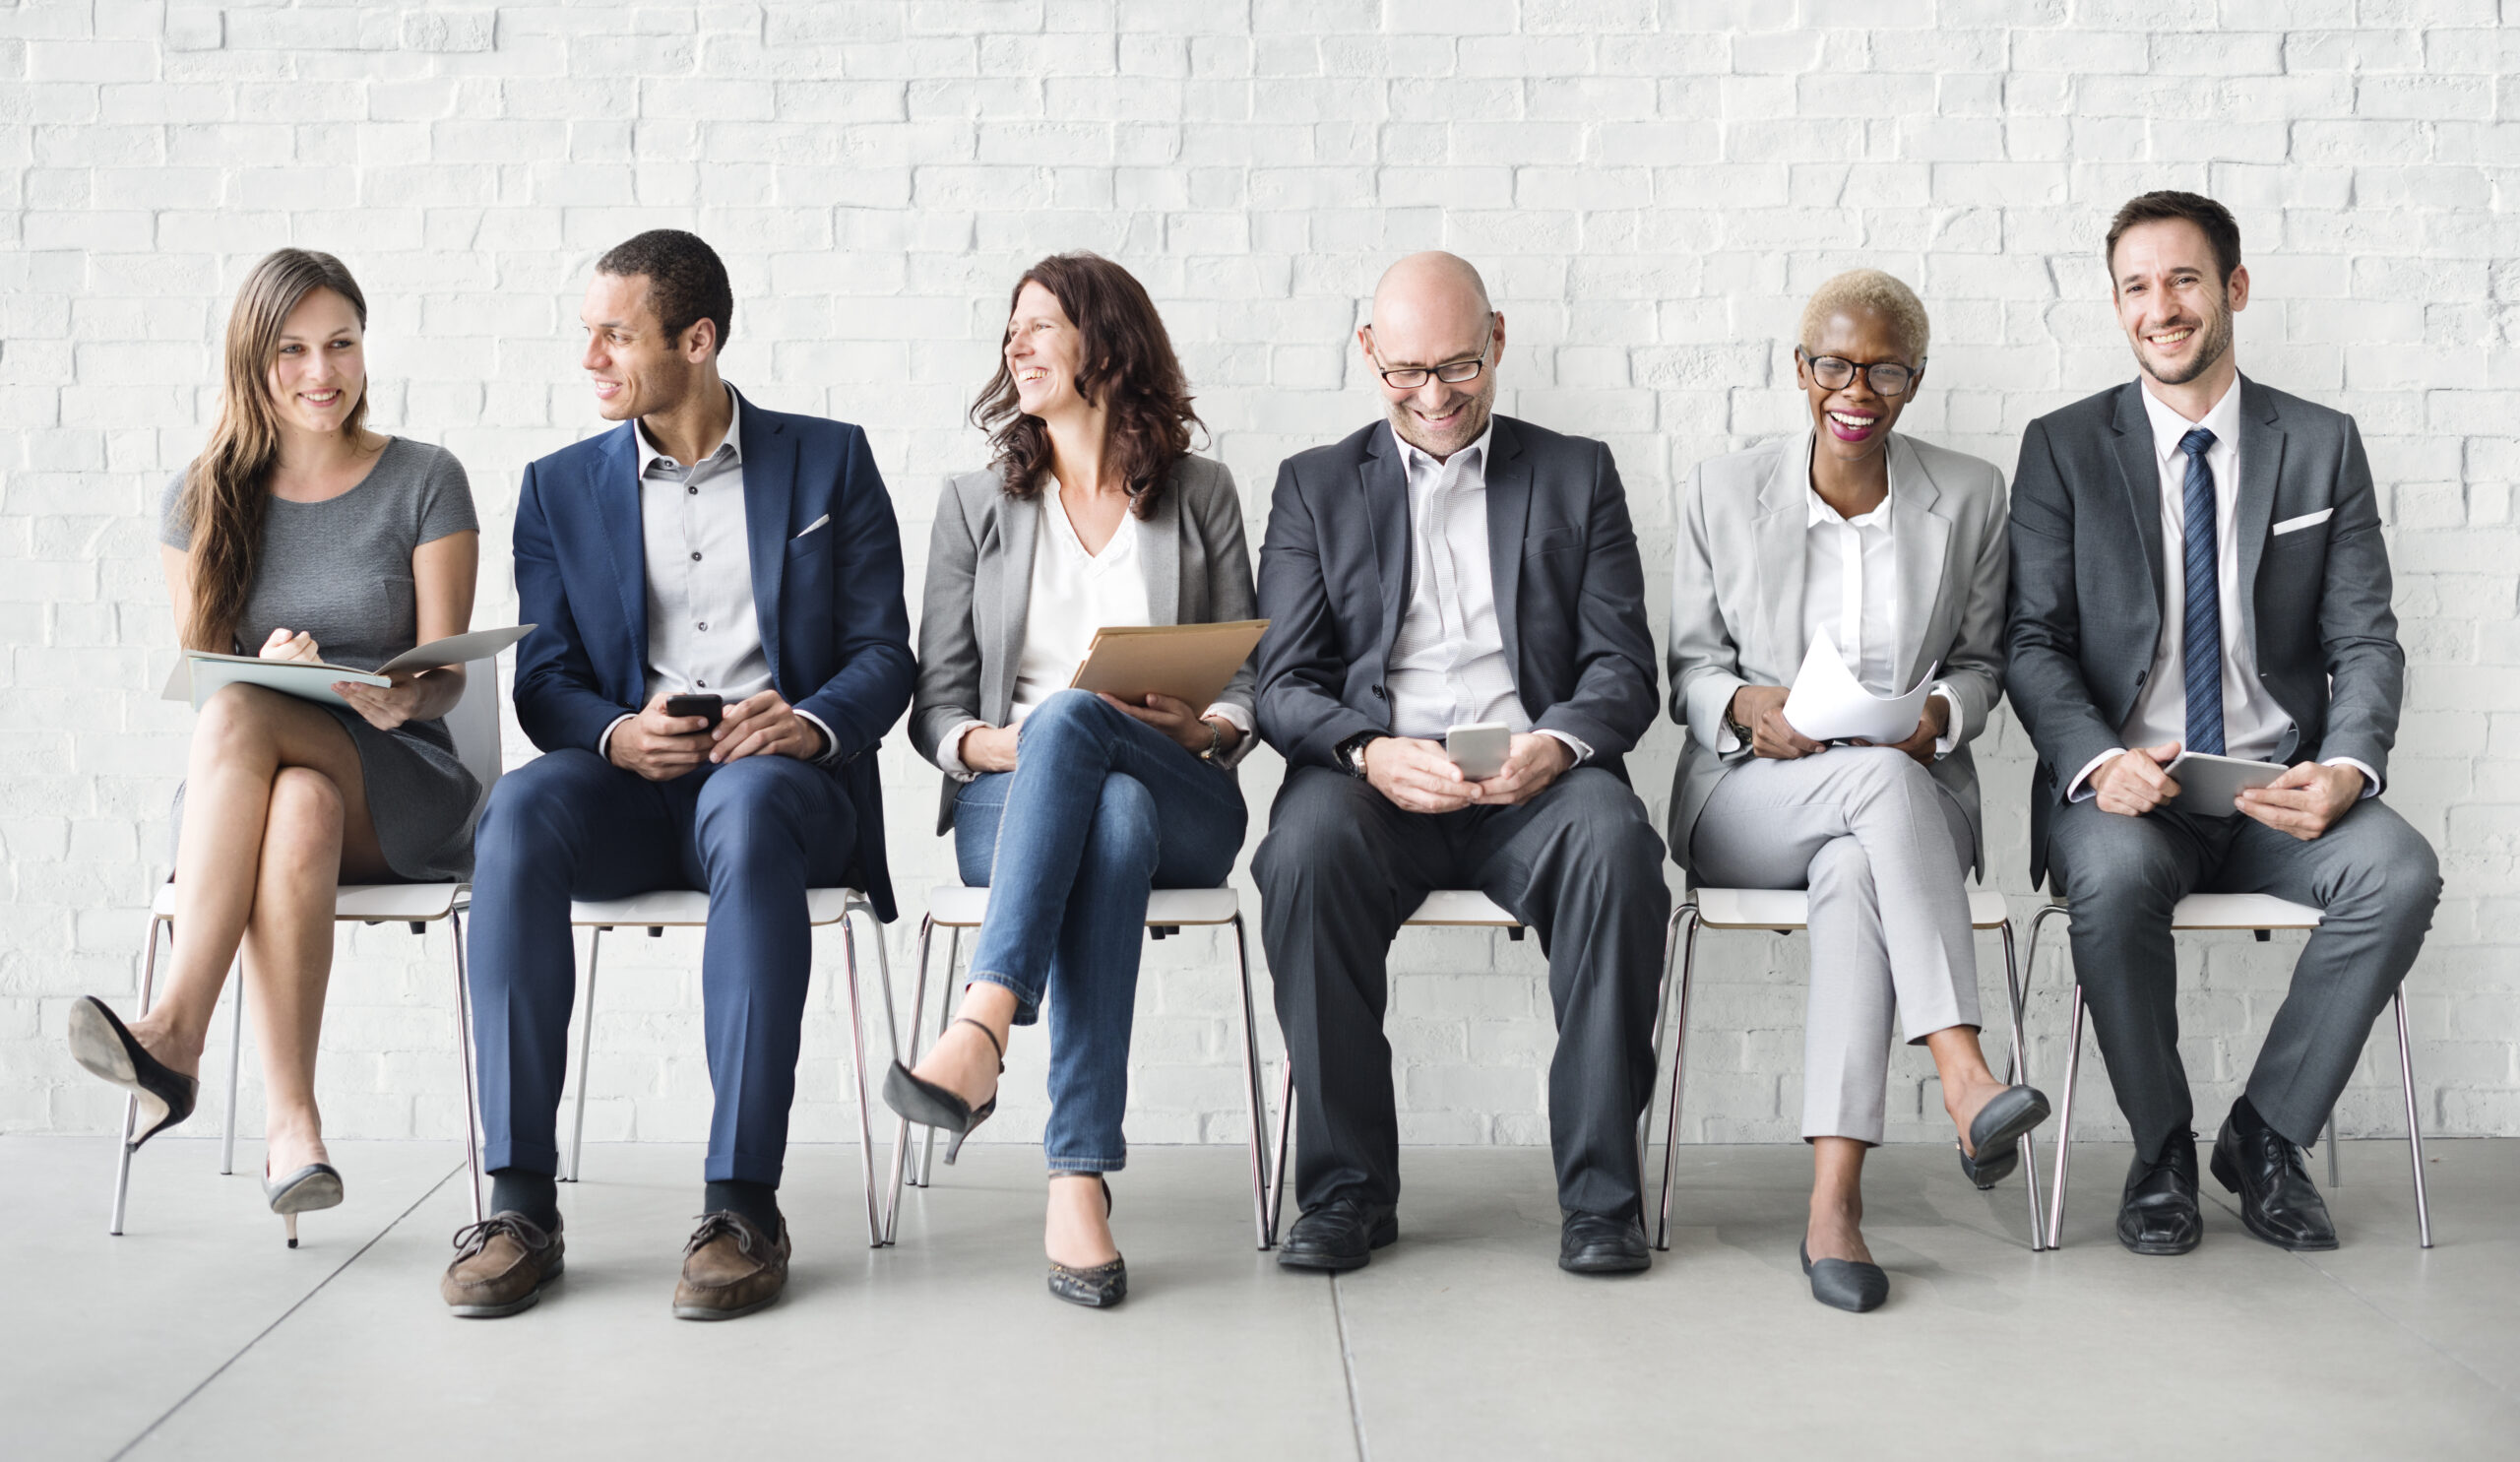 line of business people sitting in chairs against brick wall